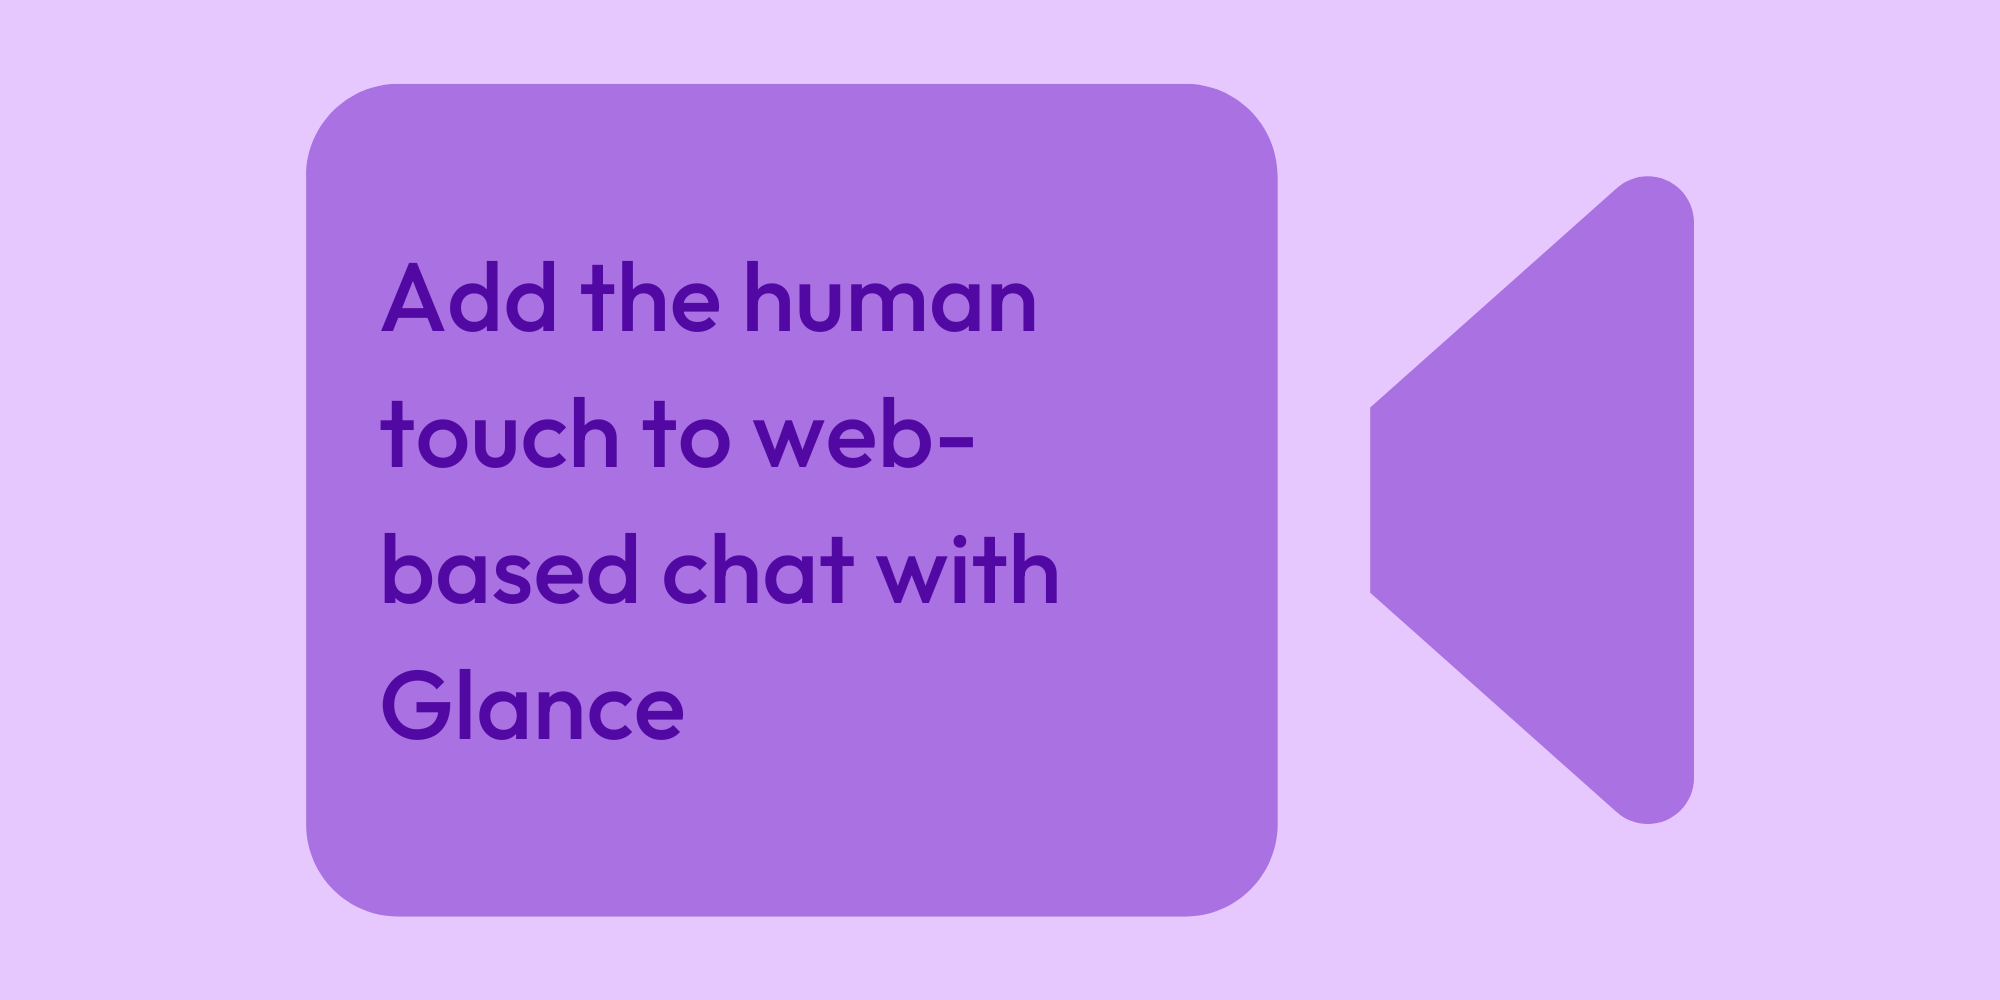 Add the human touch to web-based chat with Glance